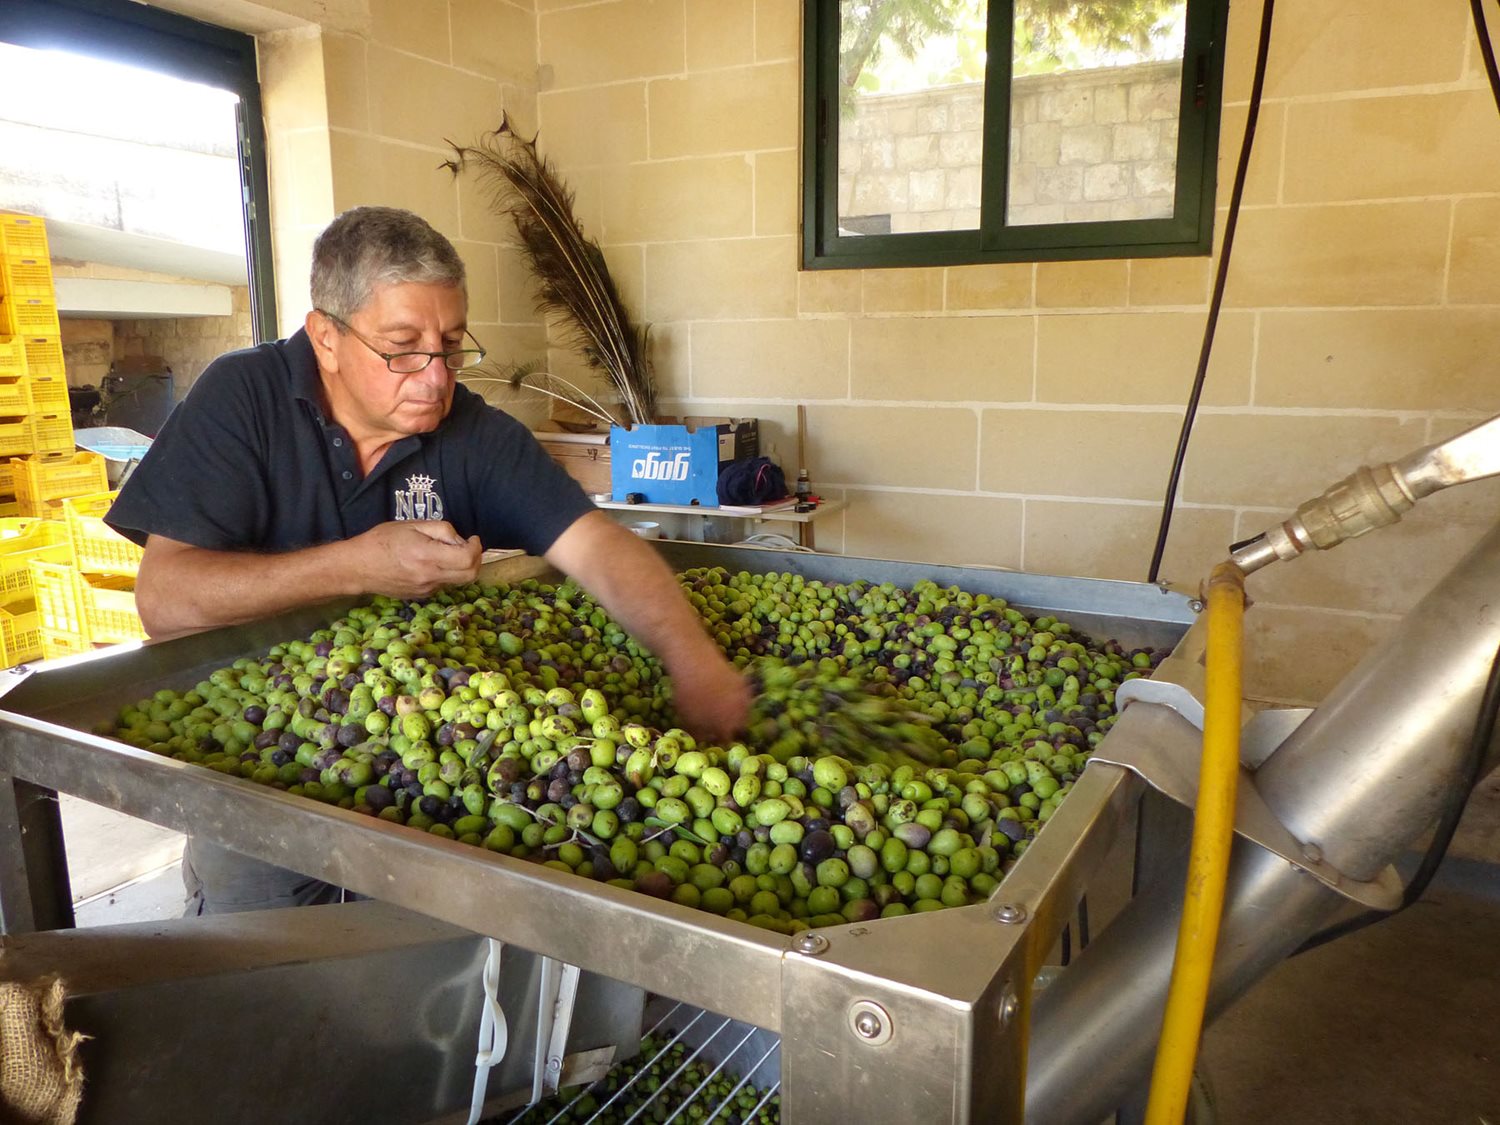 Since 1999 Sam Cremona has led the revival of the olive industry in Malta. As one of the island nation&rsquo;s few operators of an olive press, he processes both his own harvests and others from nearby farms.